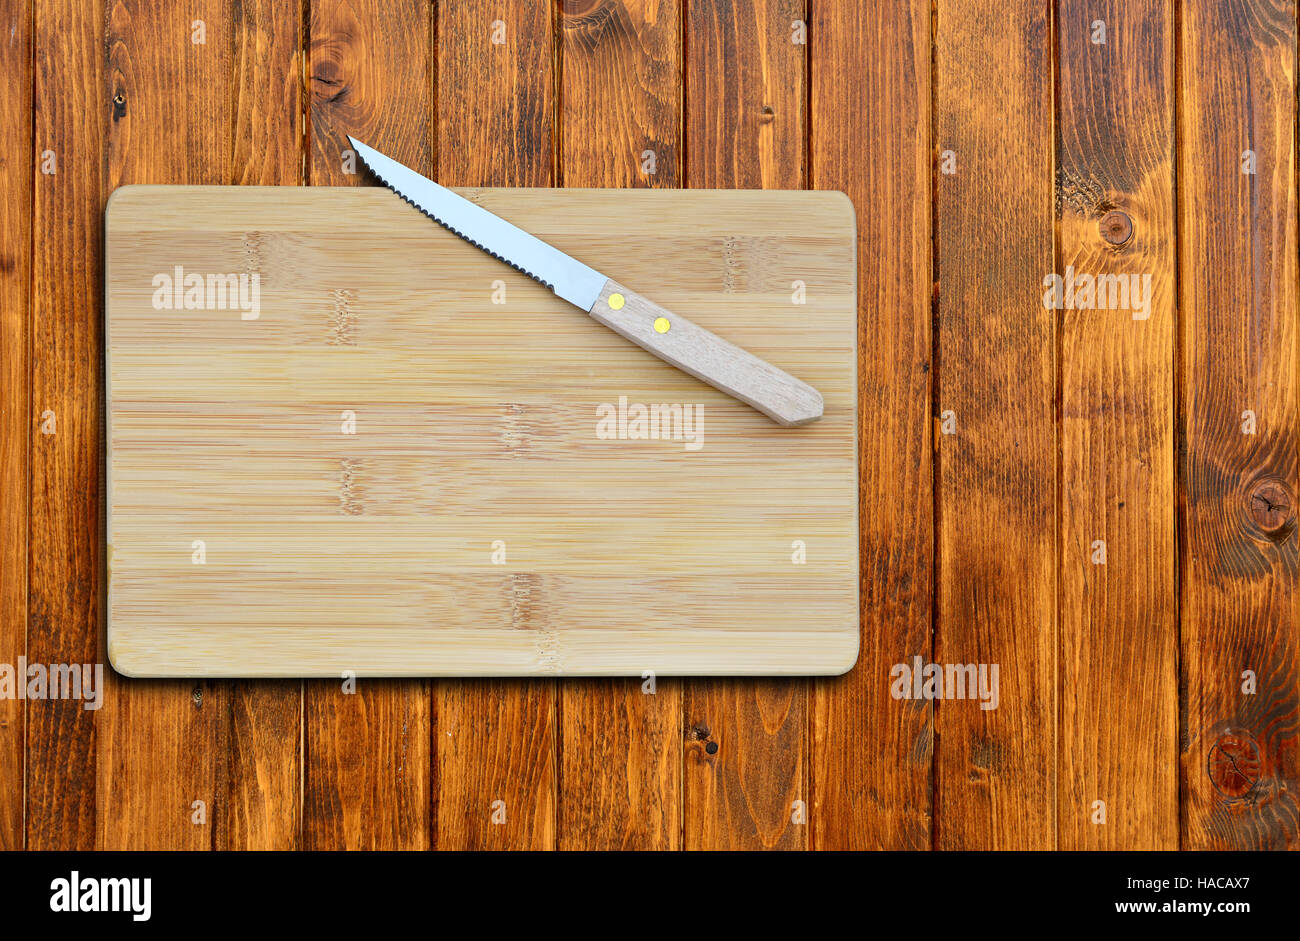 https://c8.alamy.com/comp/HACAX7/empty-bamboo-cutting-board-and-knife-on-a-old-wooden-table-for-product-HACAX7.jpg